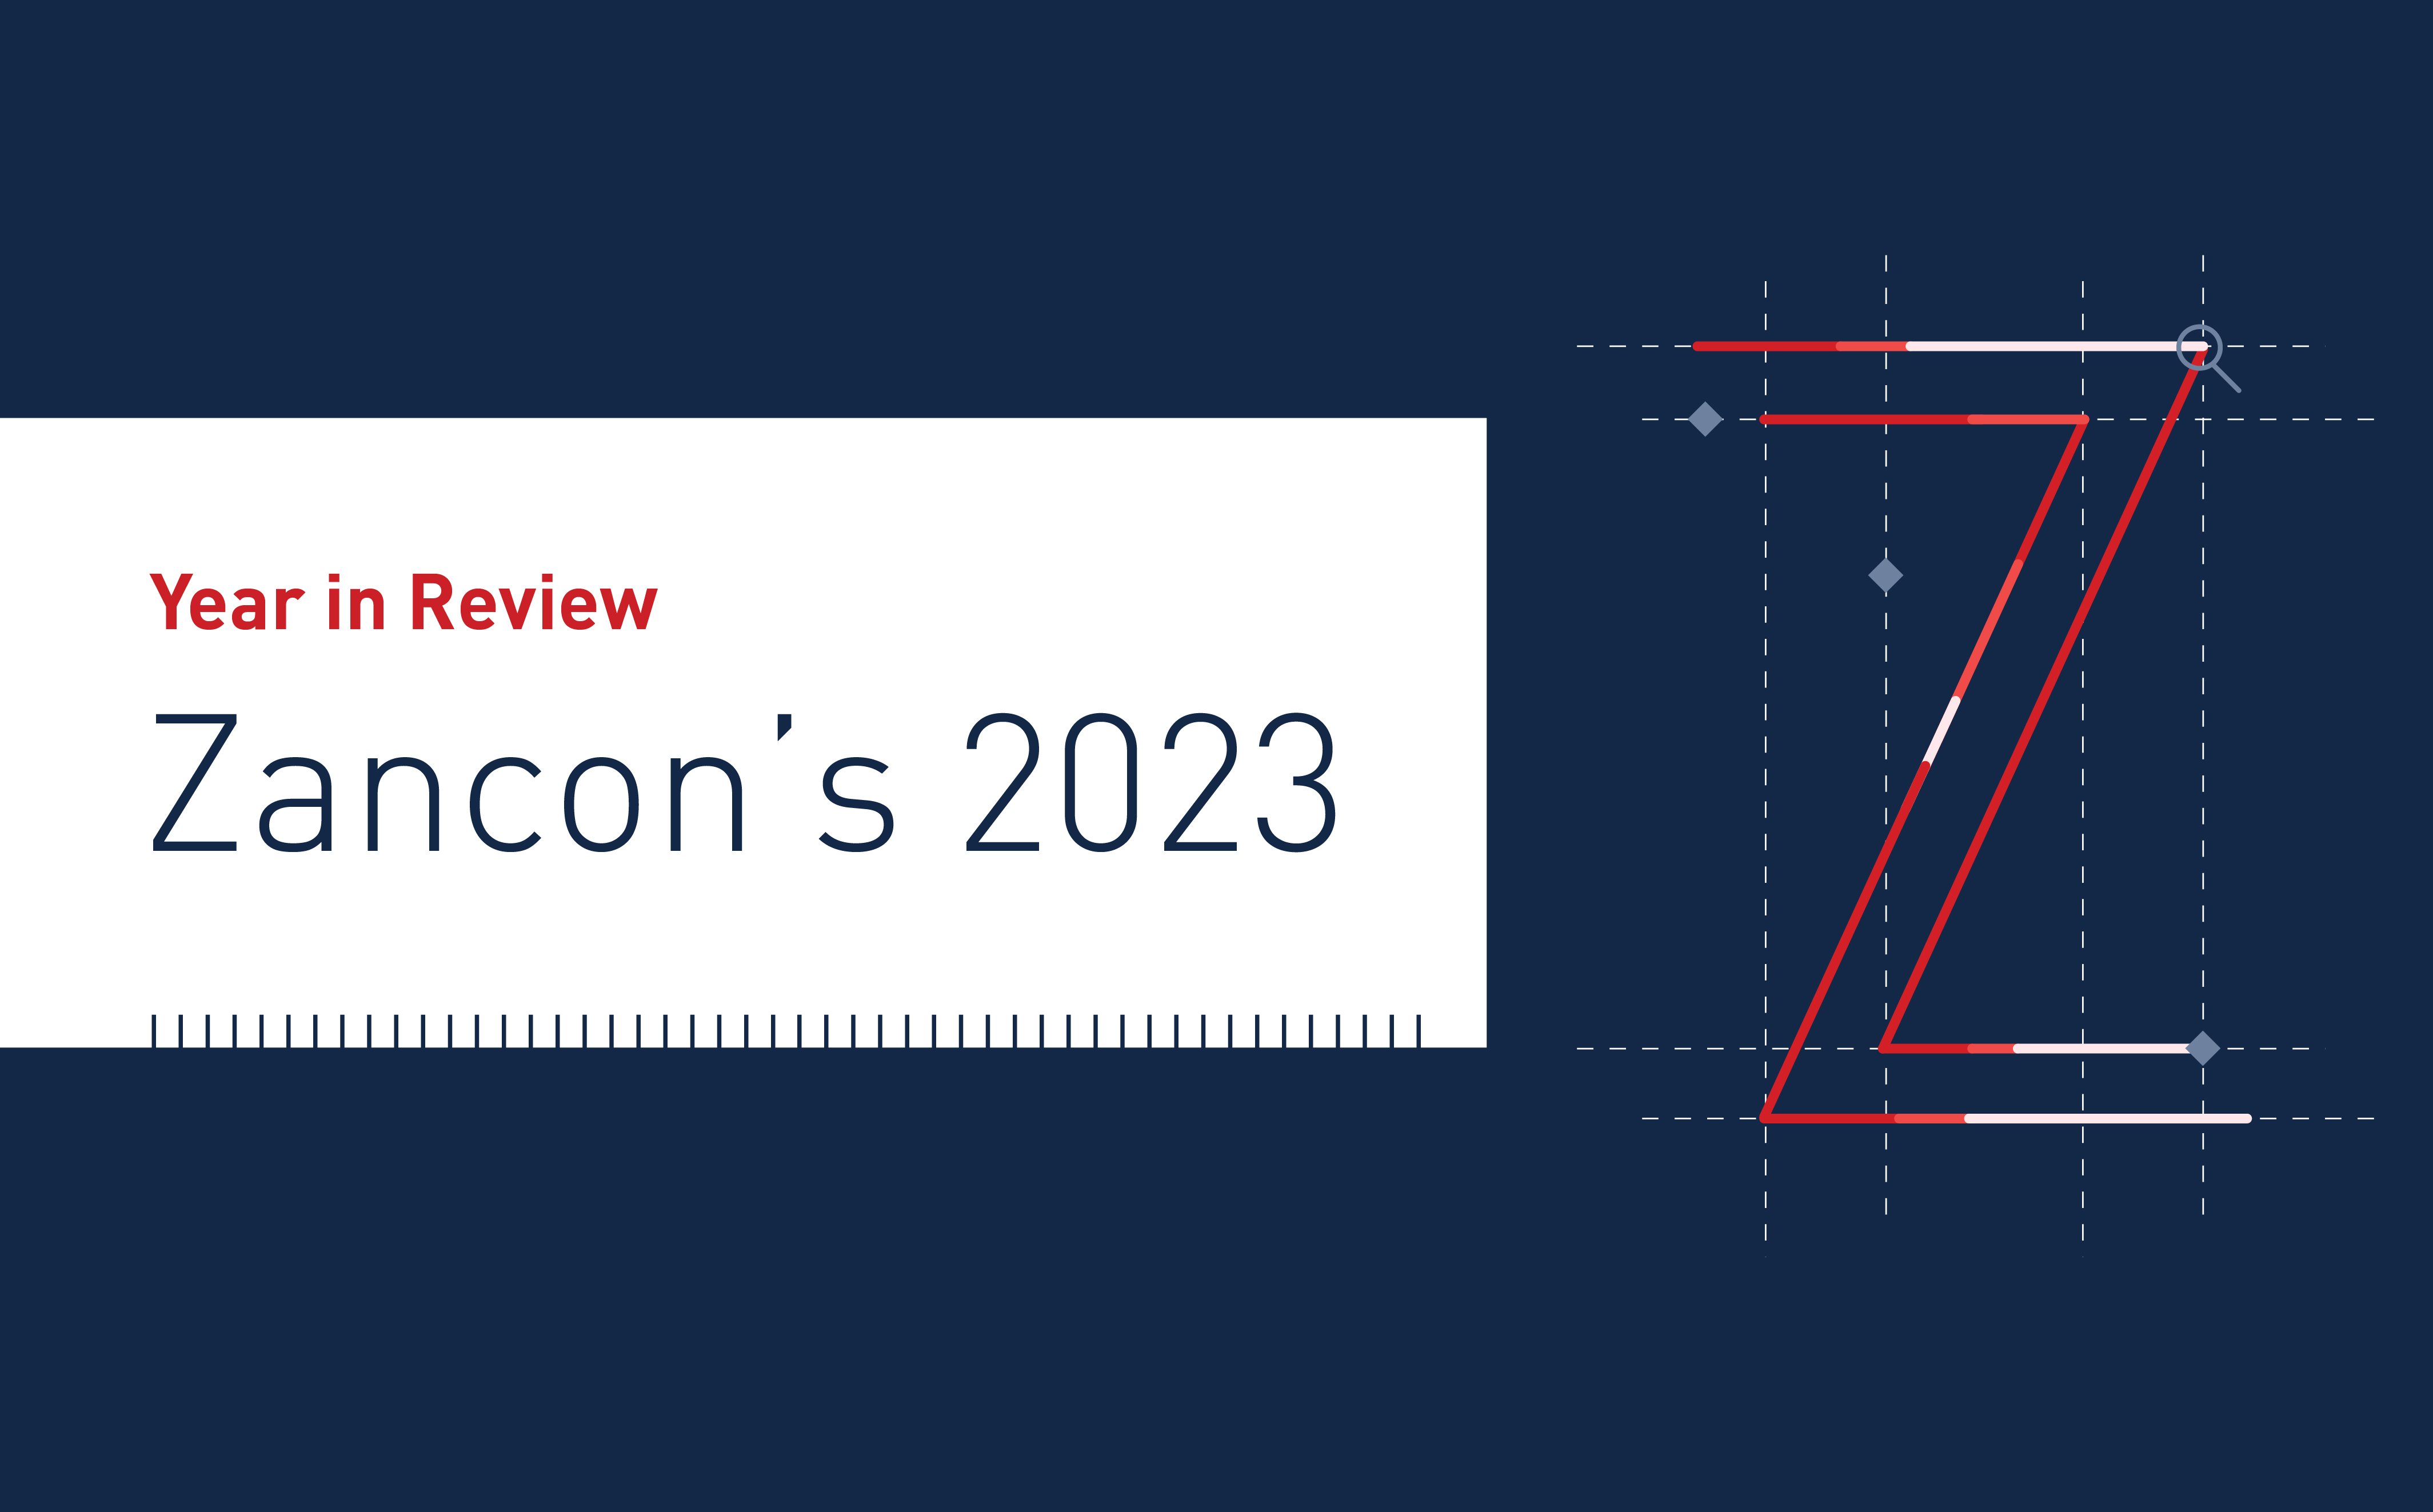 Year in Review - Zancon's 2023